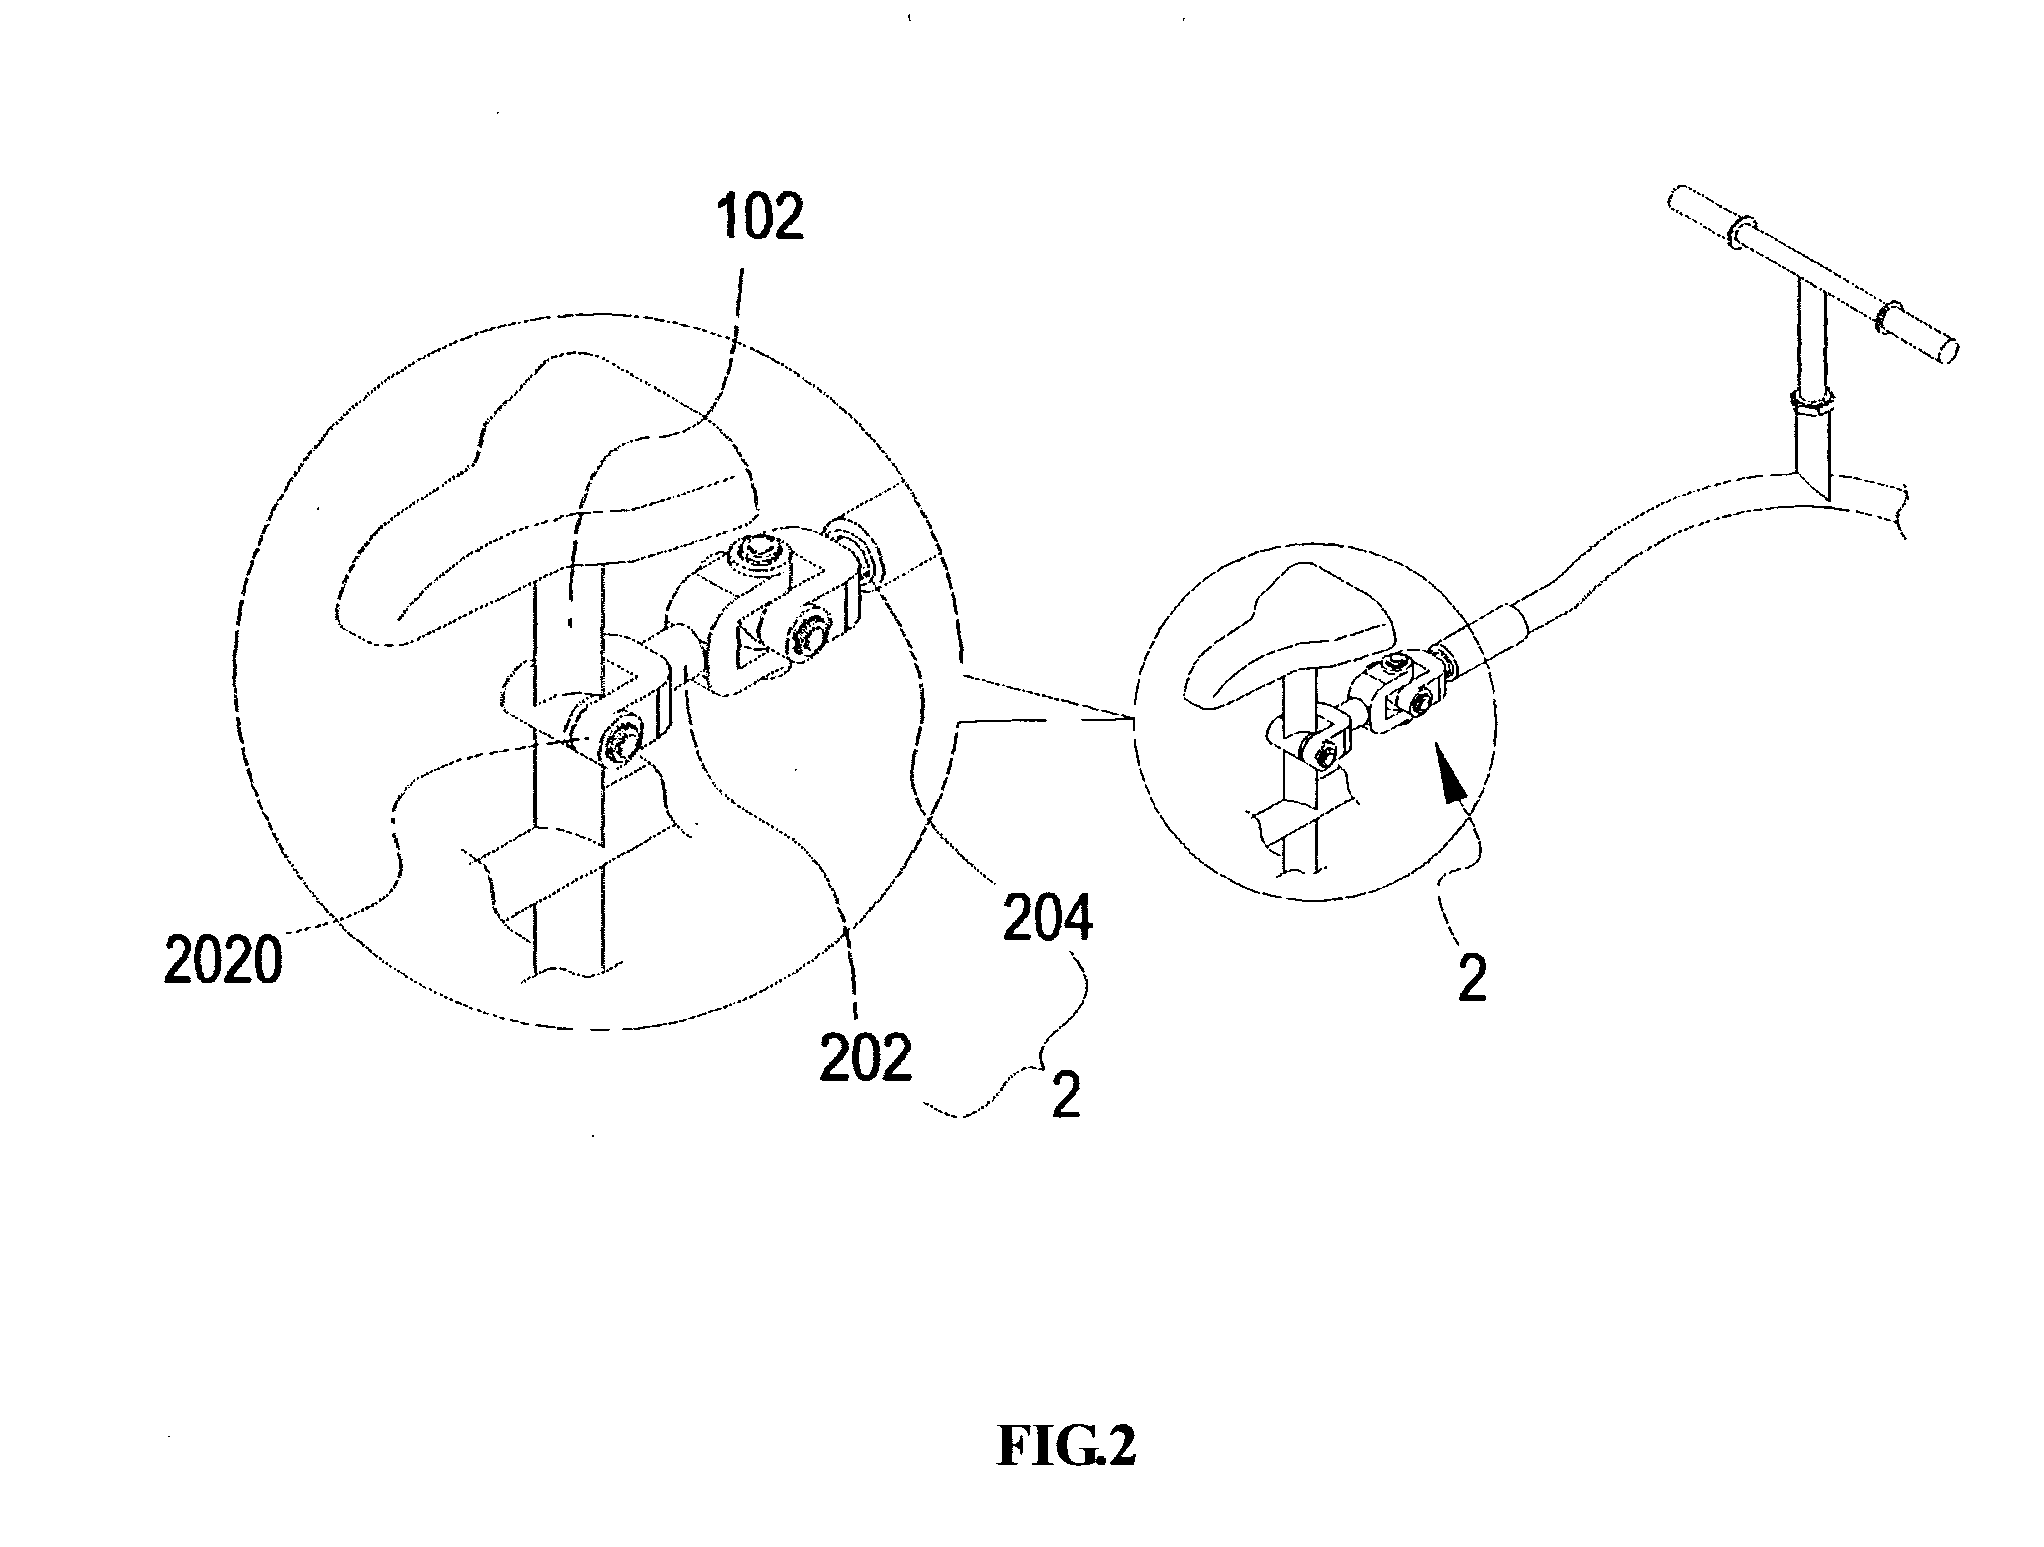 Adapter device of tandem bicycle